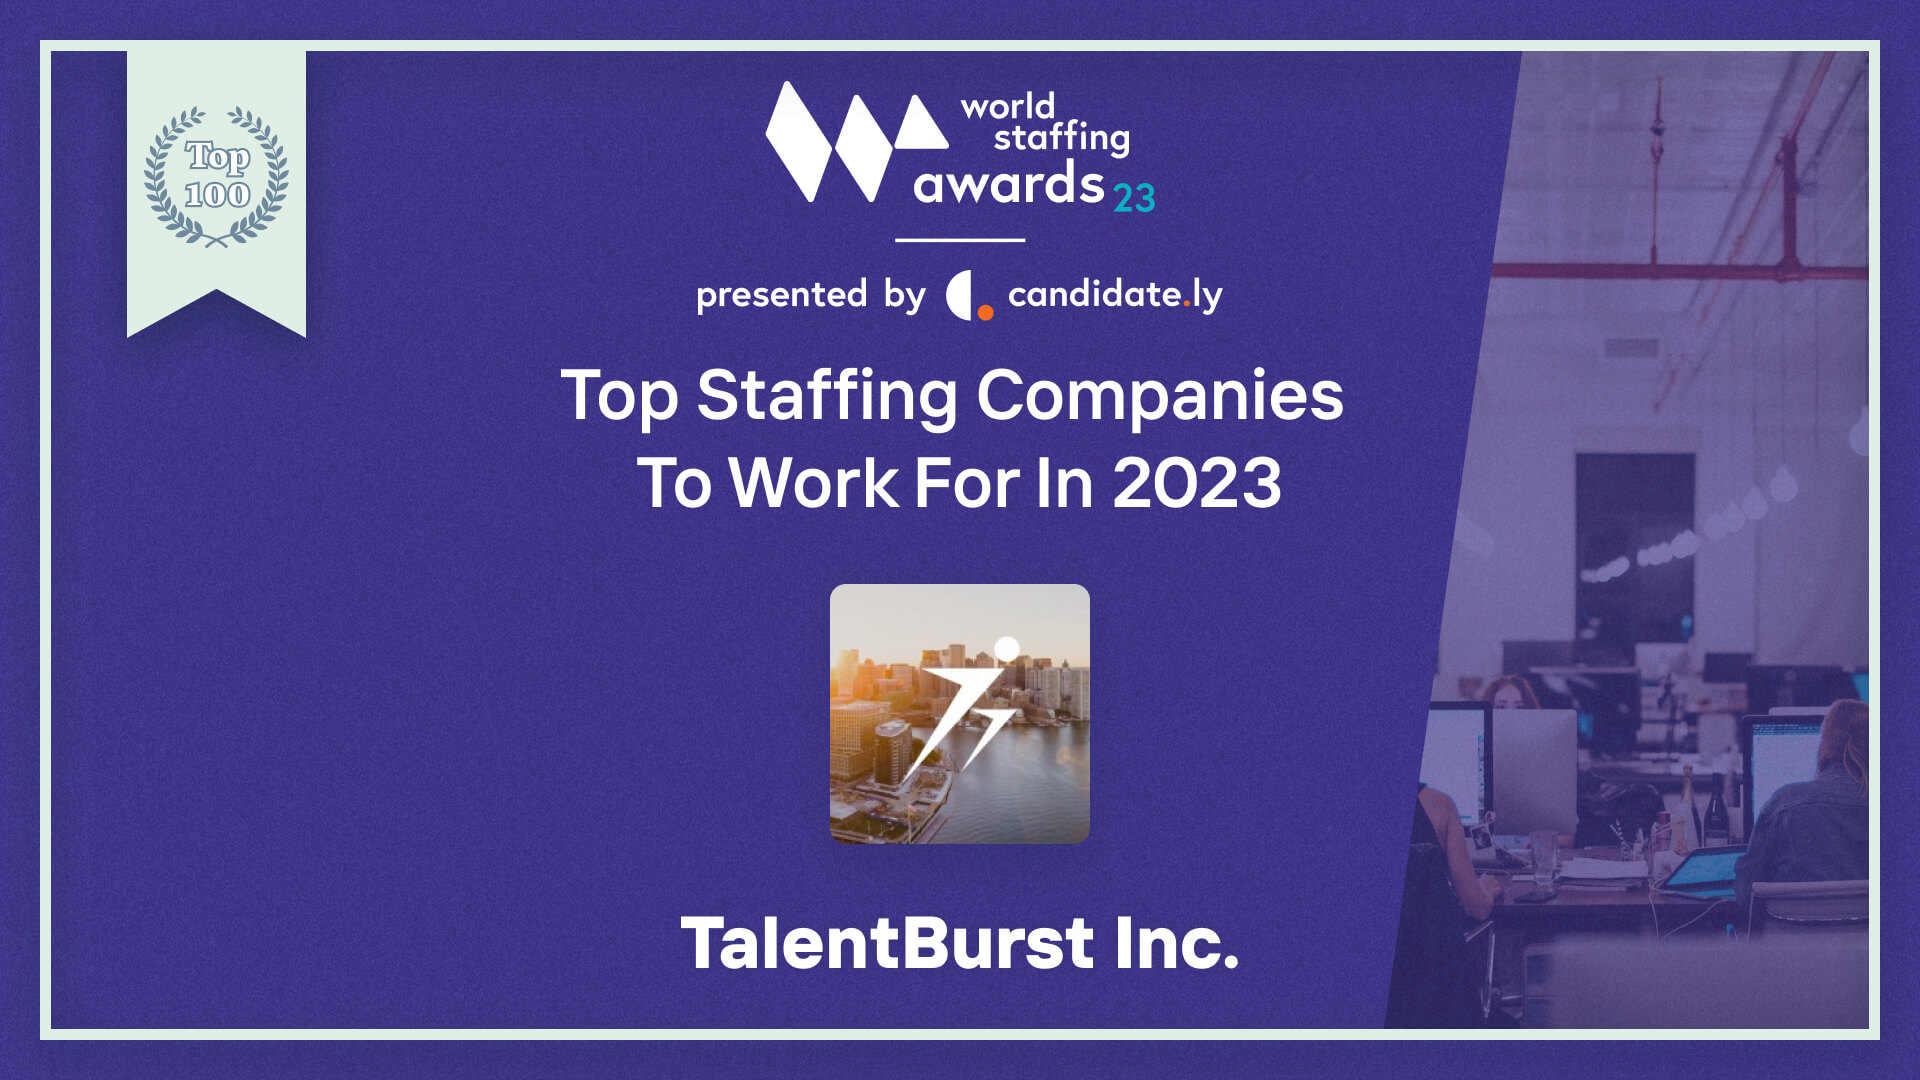 TalentBurst Voted Top 100 Staffing Company to Work for in 2023